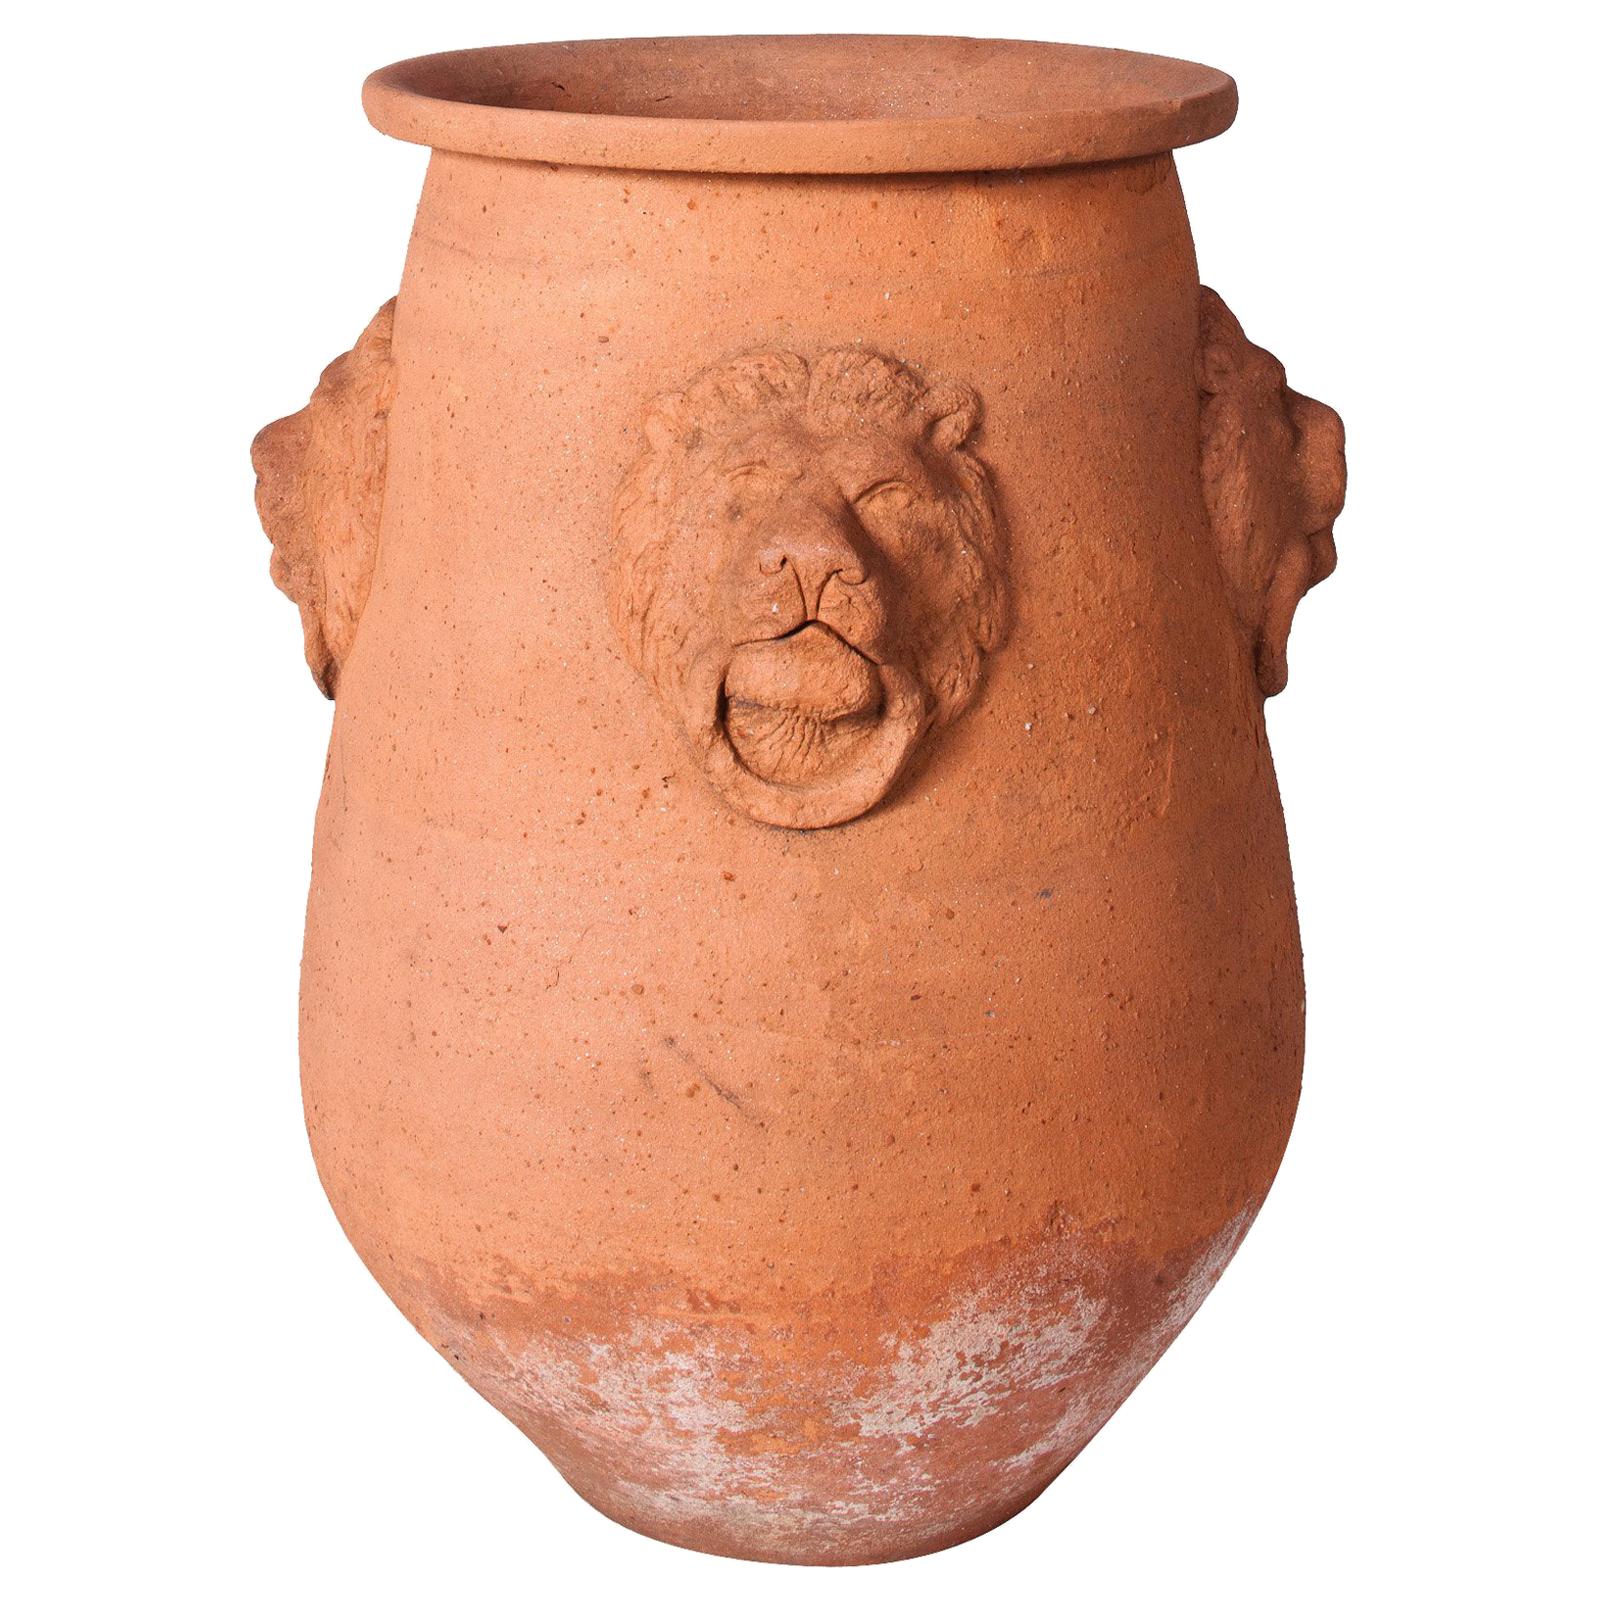 Large Terracotta Garden Pot with Lion Engraving from Early 20th Century, England